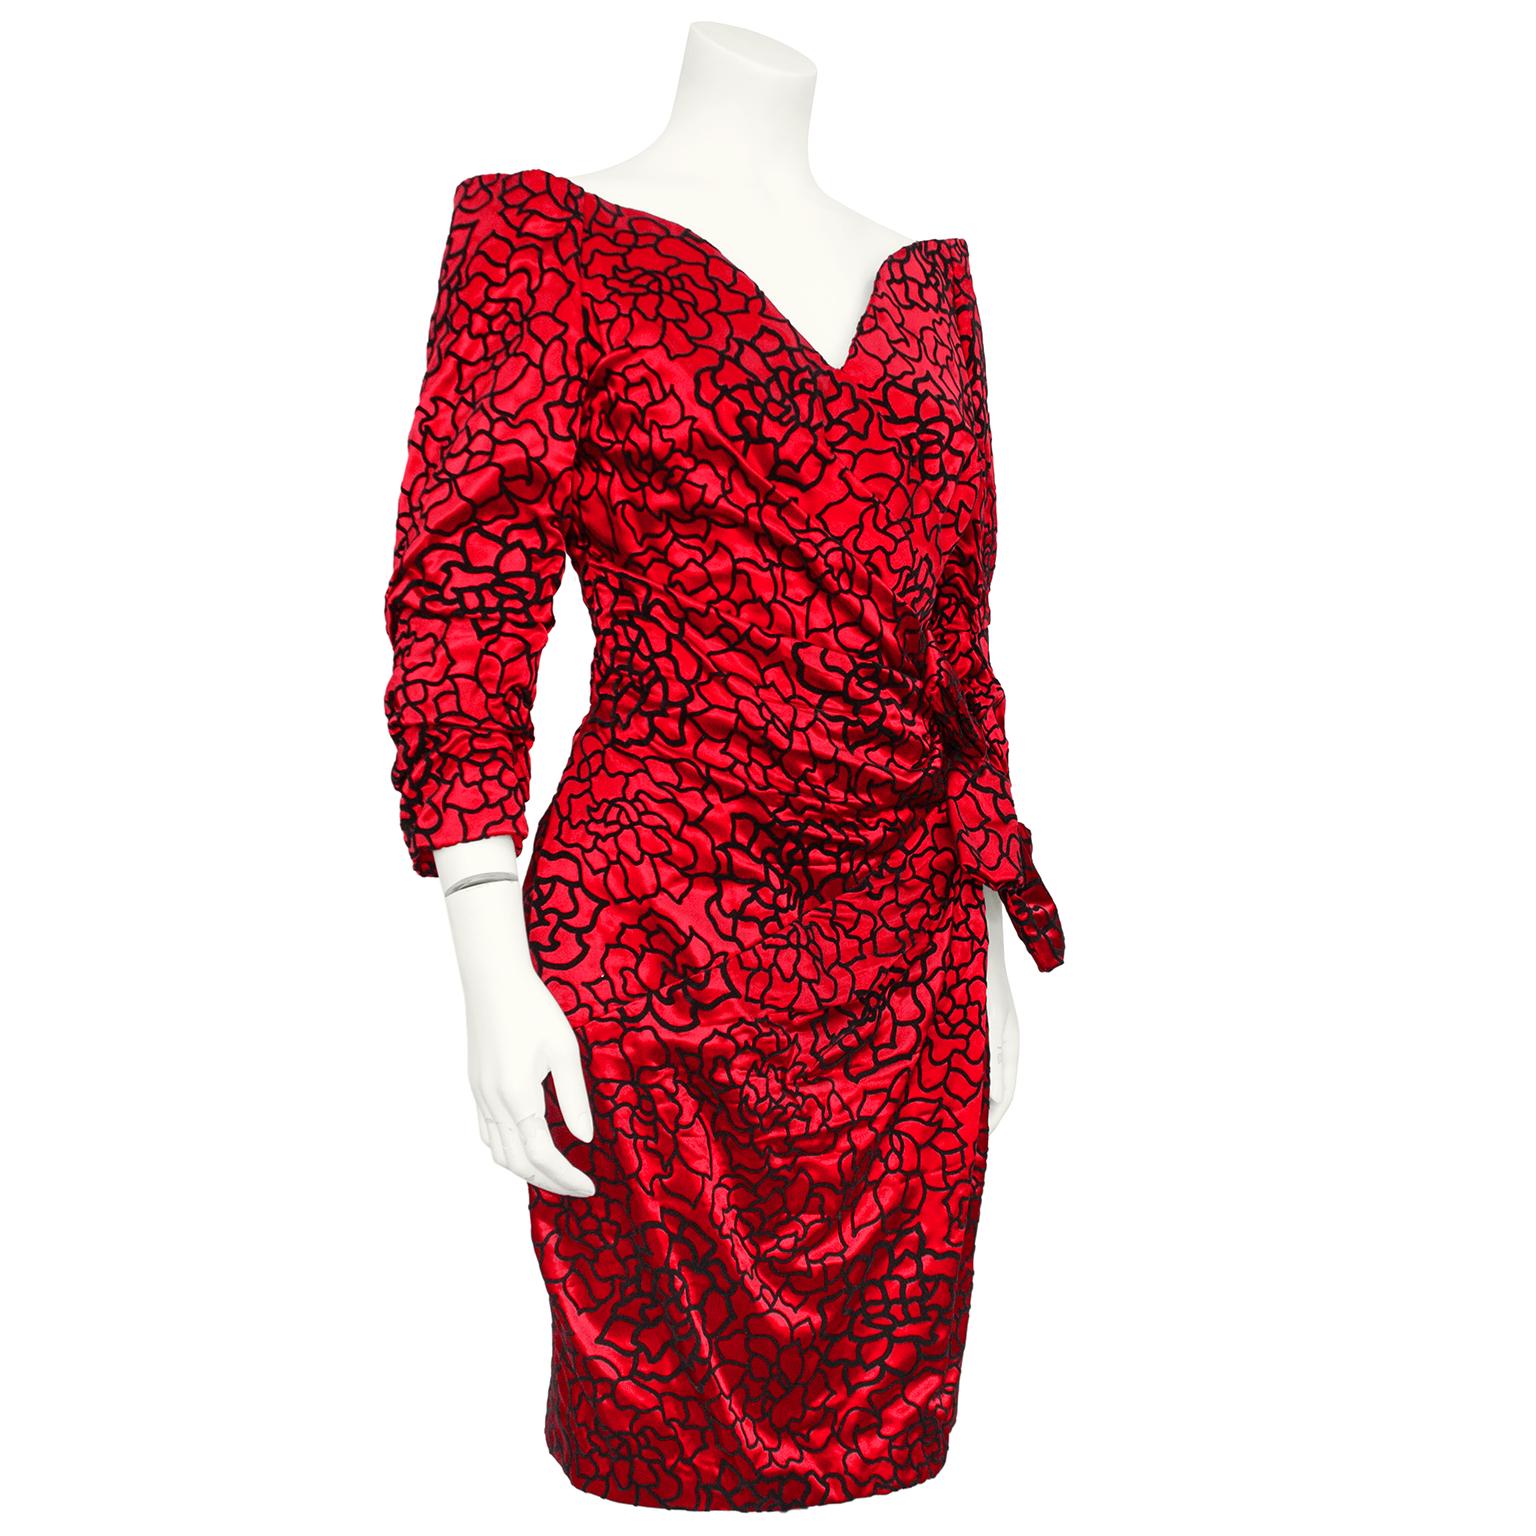 Beautiful Scaasi cocktail dress from the 1980s. Red satin with allover black velvet flocked pattern creating the outlines of flowers. Off the shoulder with a sweetheart neckline and ruched bracelet length sleeves. Diagonal ruching across the stomach